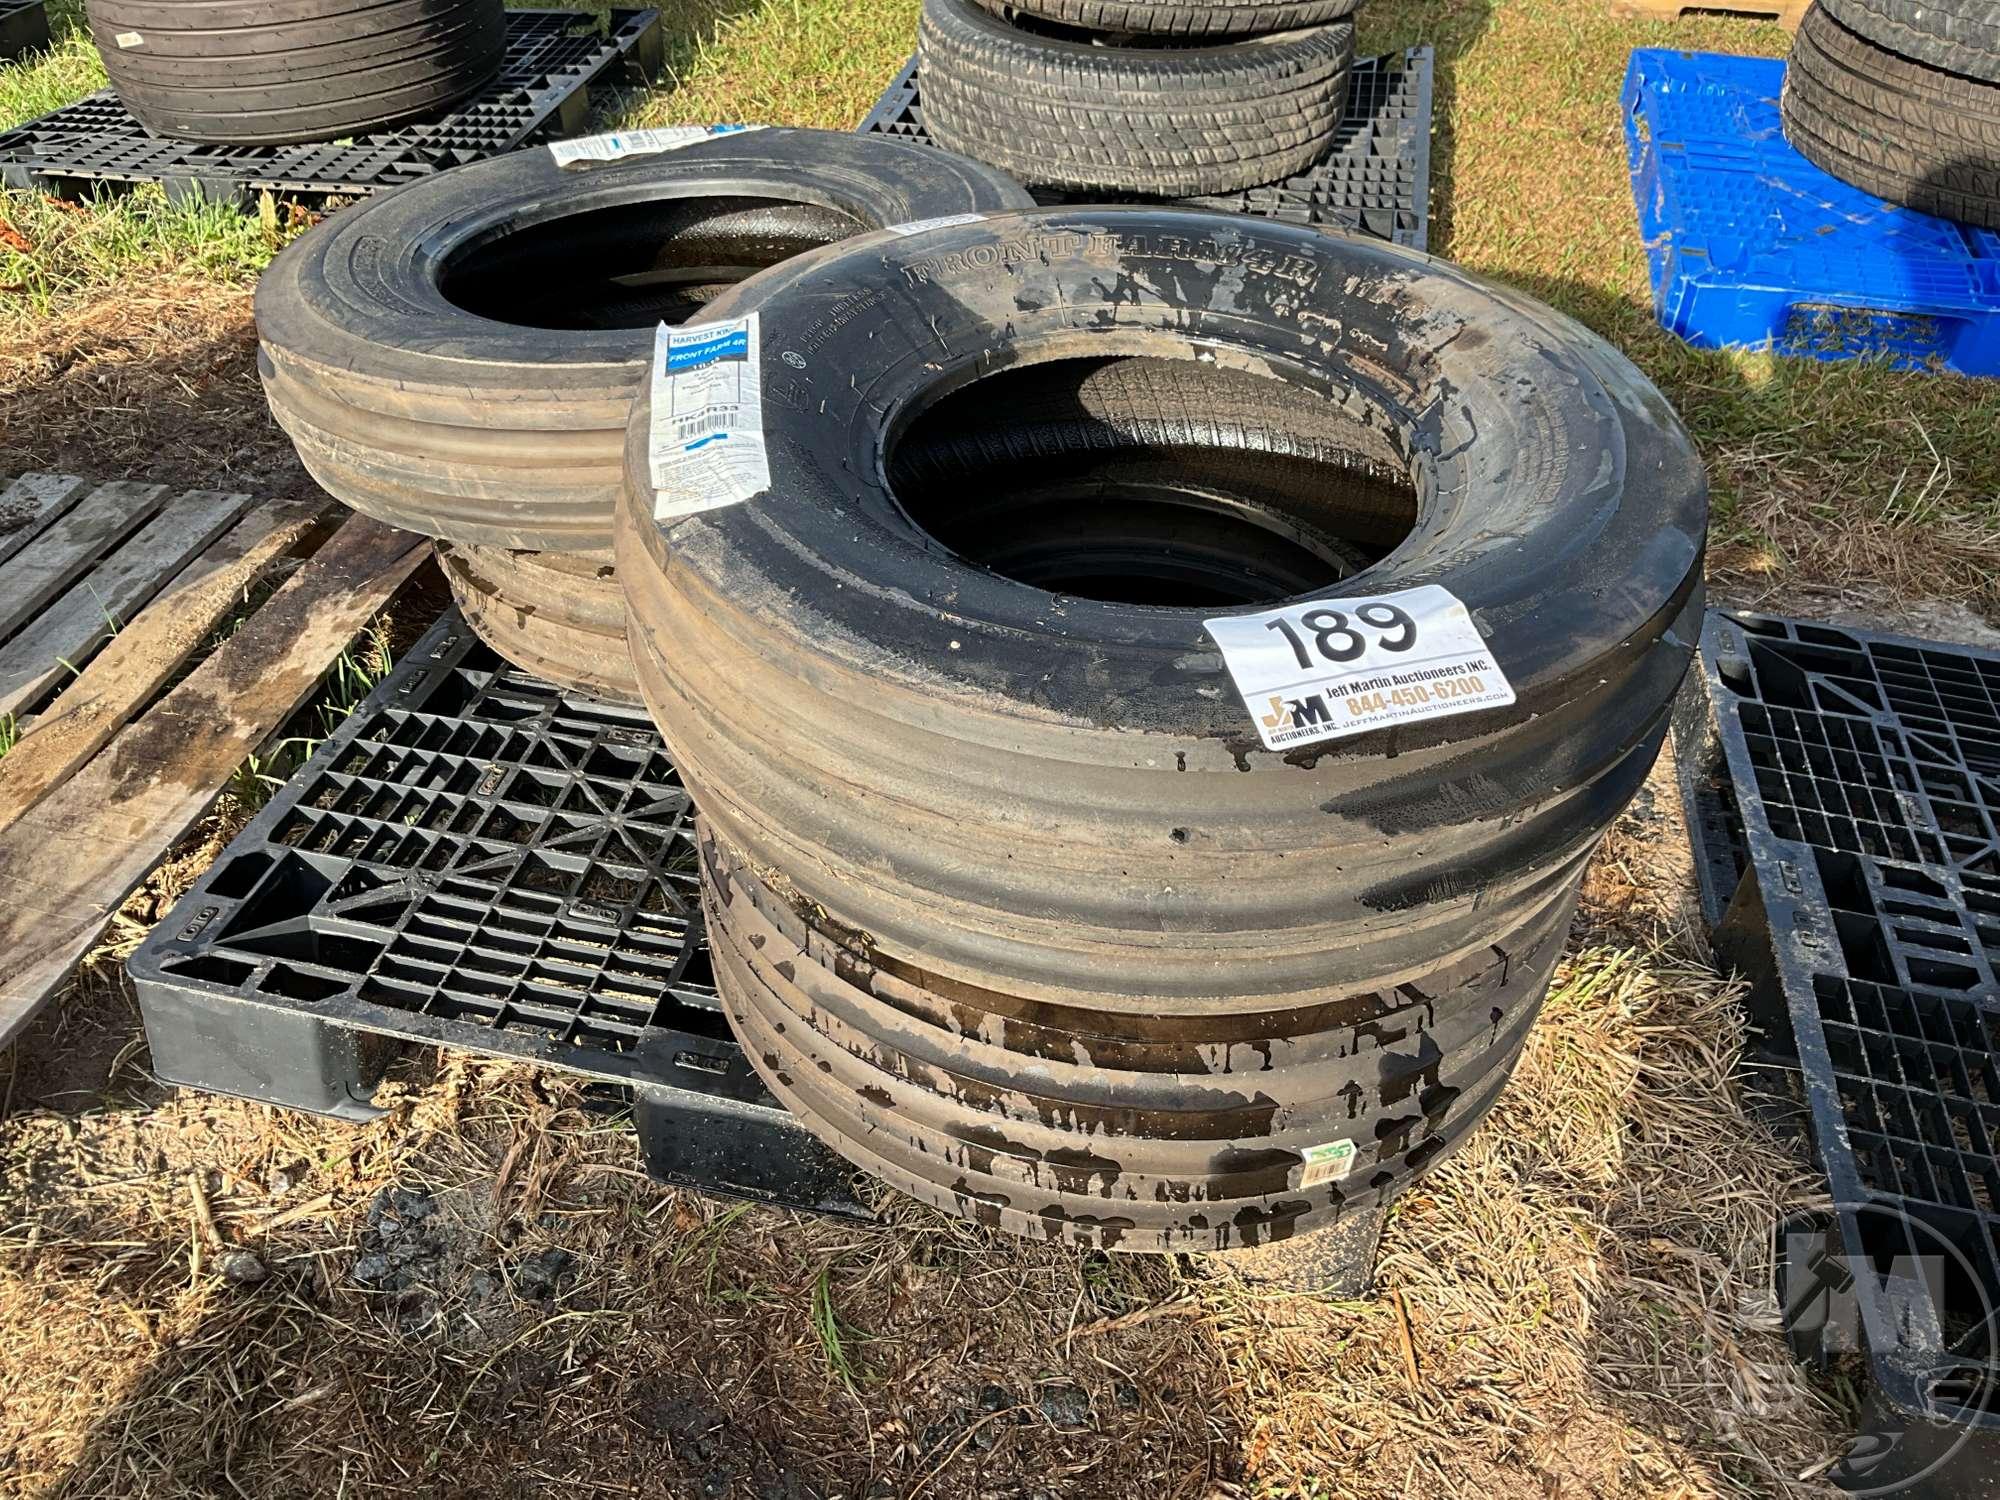 QTY OF (3) 11-15 TRACTOR TIRES, QTY OF (1) 7.50-18